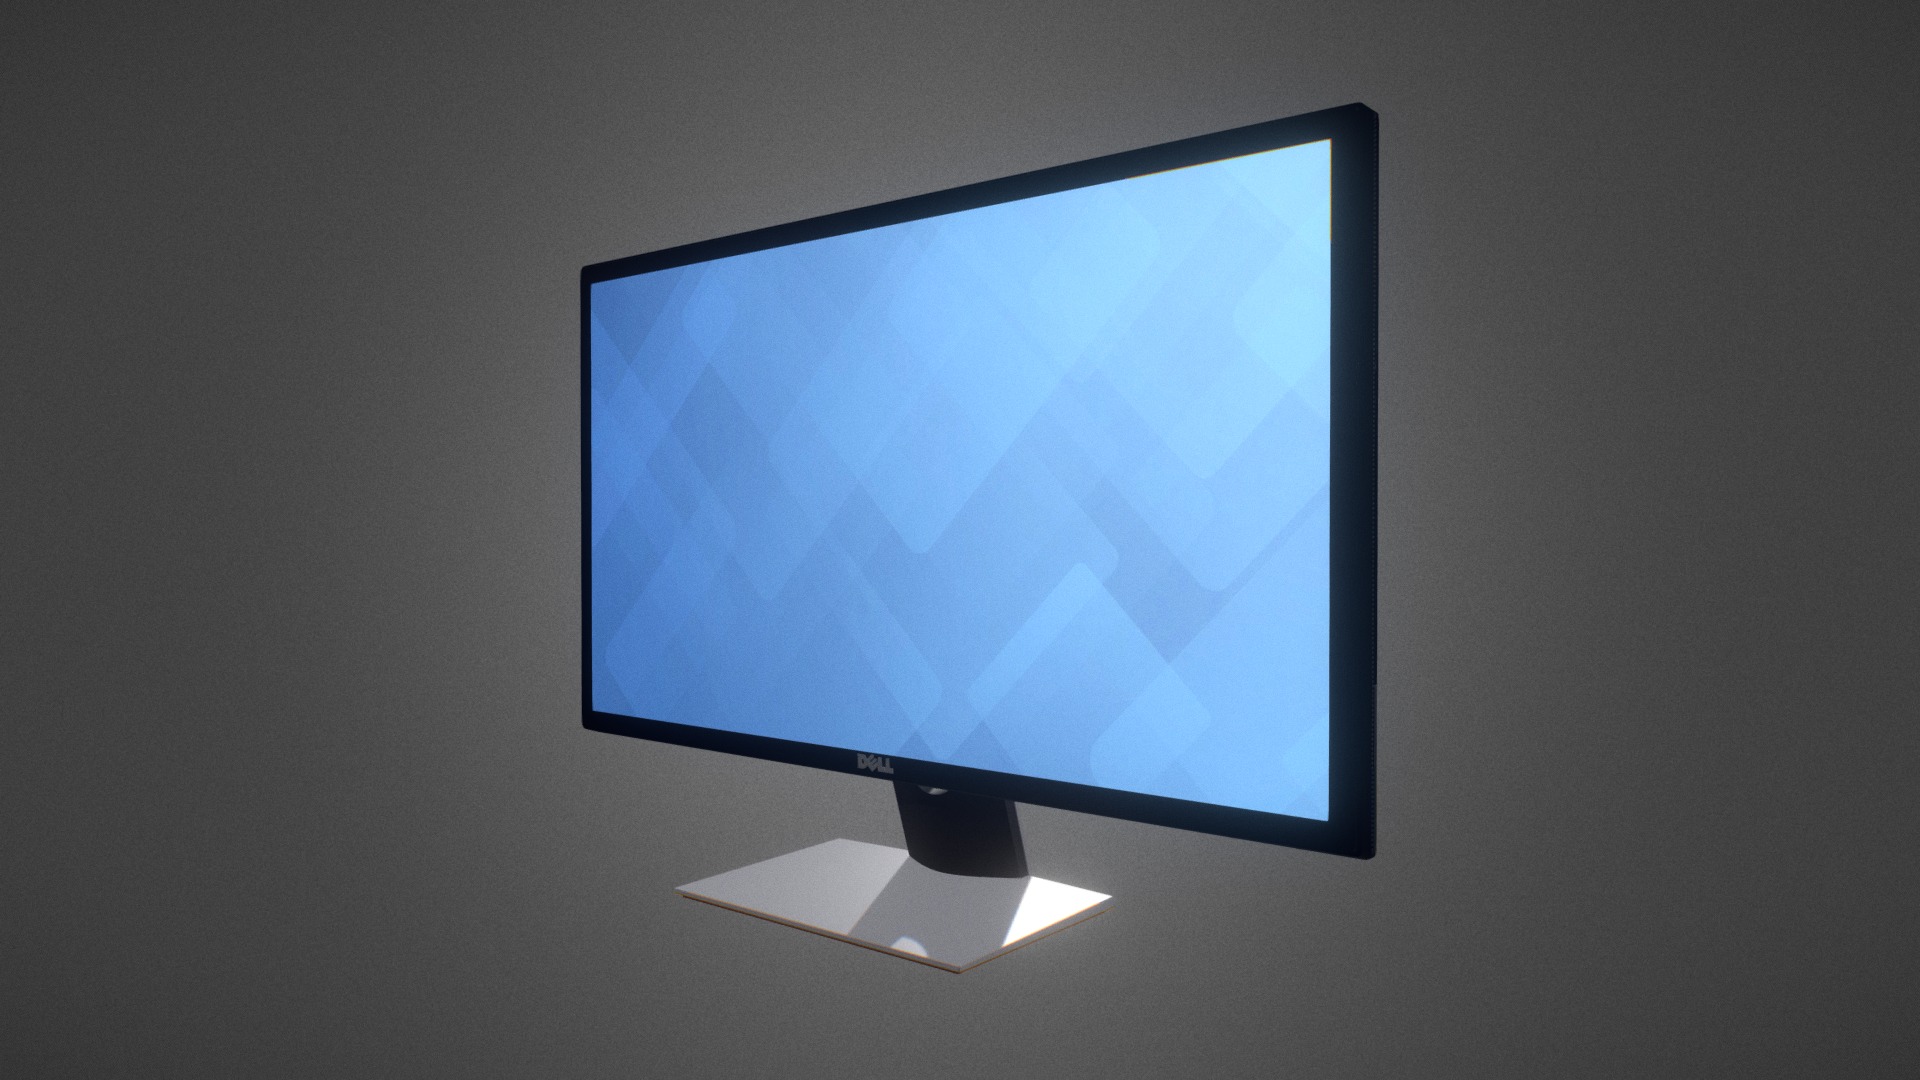 3D model Dell S2817Q for Element 3D - This is a 3D model of the Dell S2817Q for Element 3D. The 3D model is about a computer monitor with a blue screen.